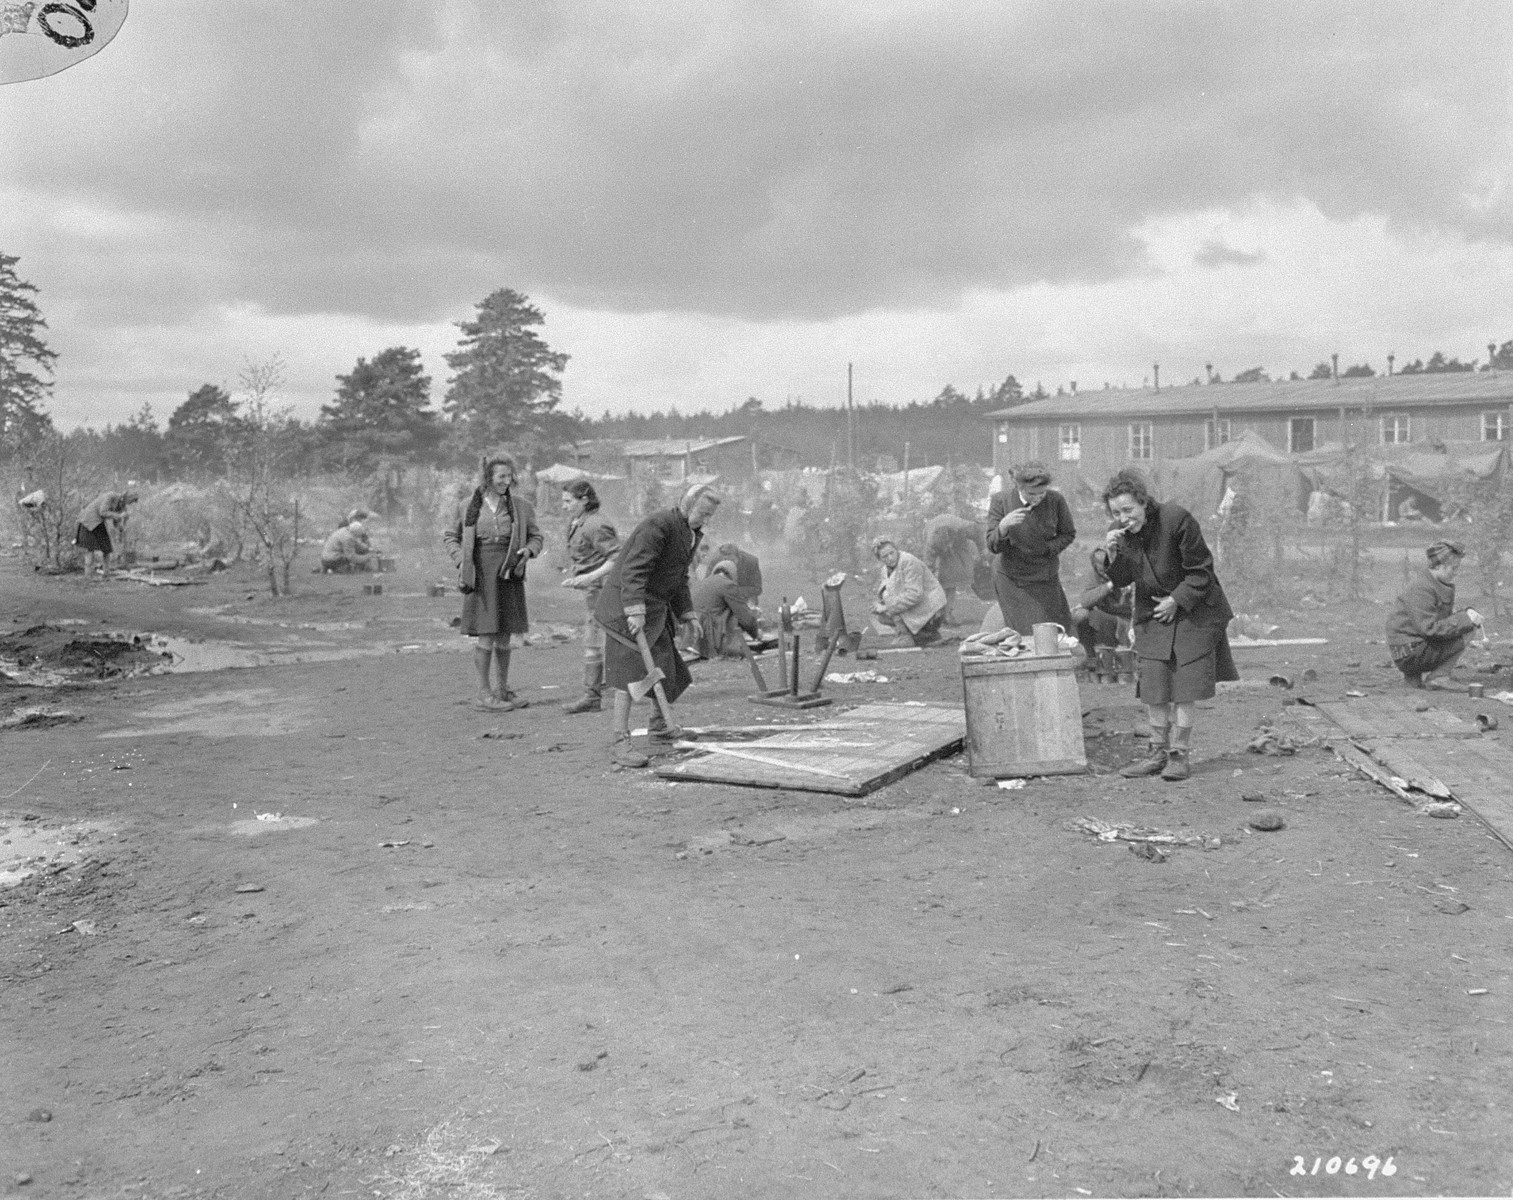 Survivors in Bergen-Belsen tend to chores after their liberation.

The original caption reads: "Women political prisoners, freed by advancing allied armies at their German prison camp at Belson [sic], Germany, wash their teeth with utensils supplied them by their liberators.  Woman at left is chopping up a door for fire wood.  Camp is now operated by British 2nd Army."